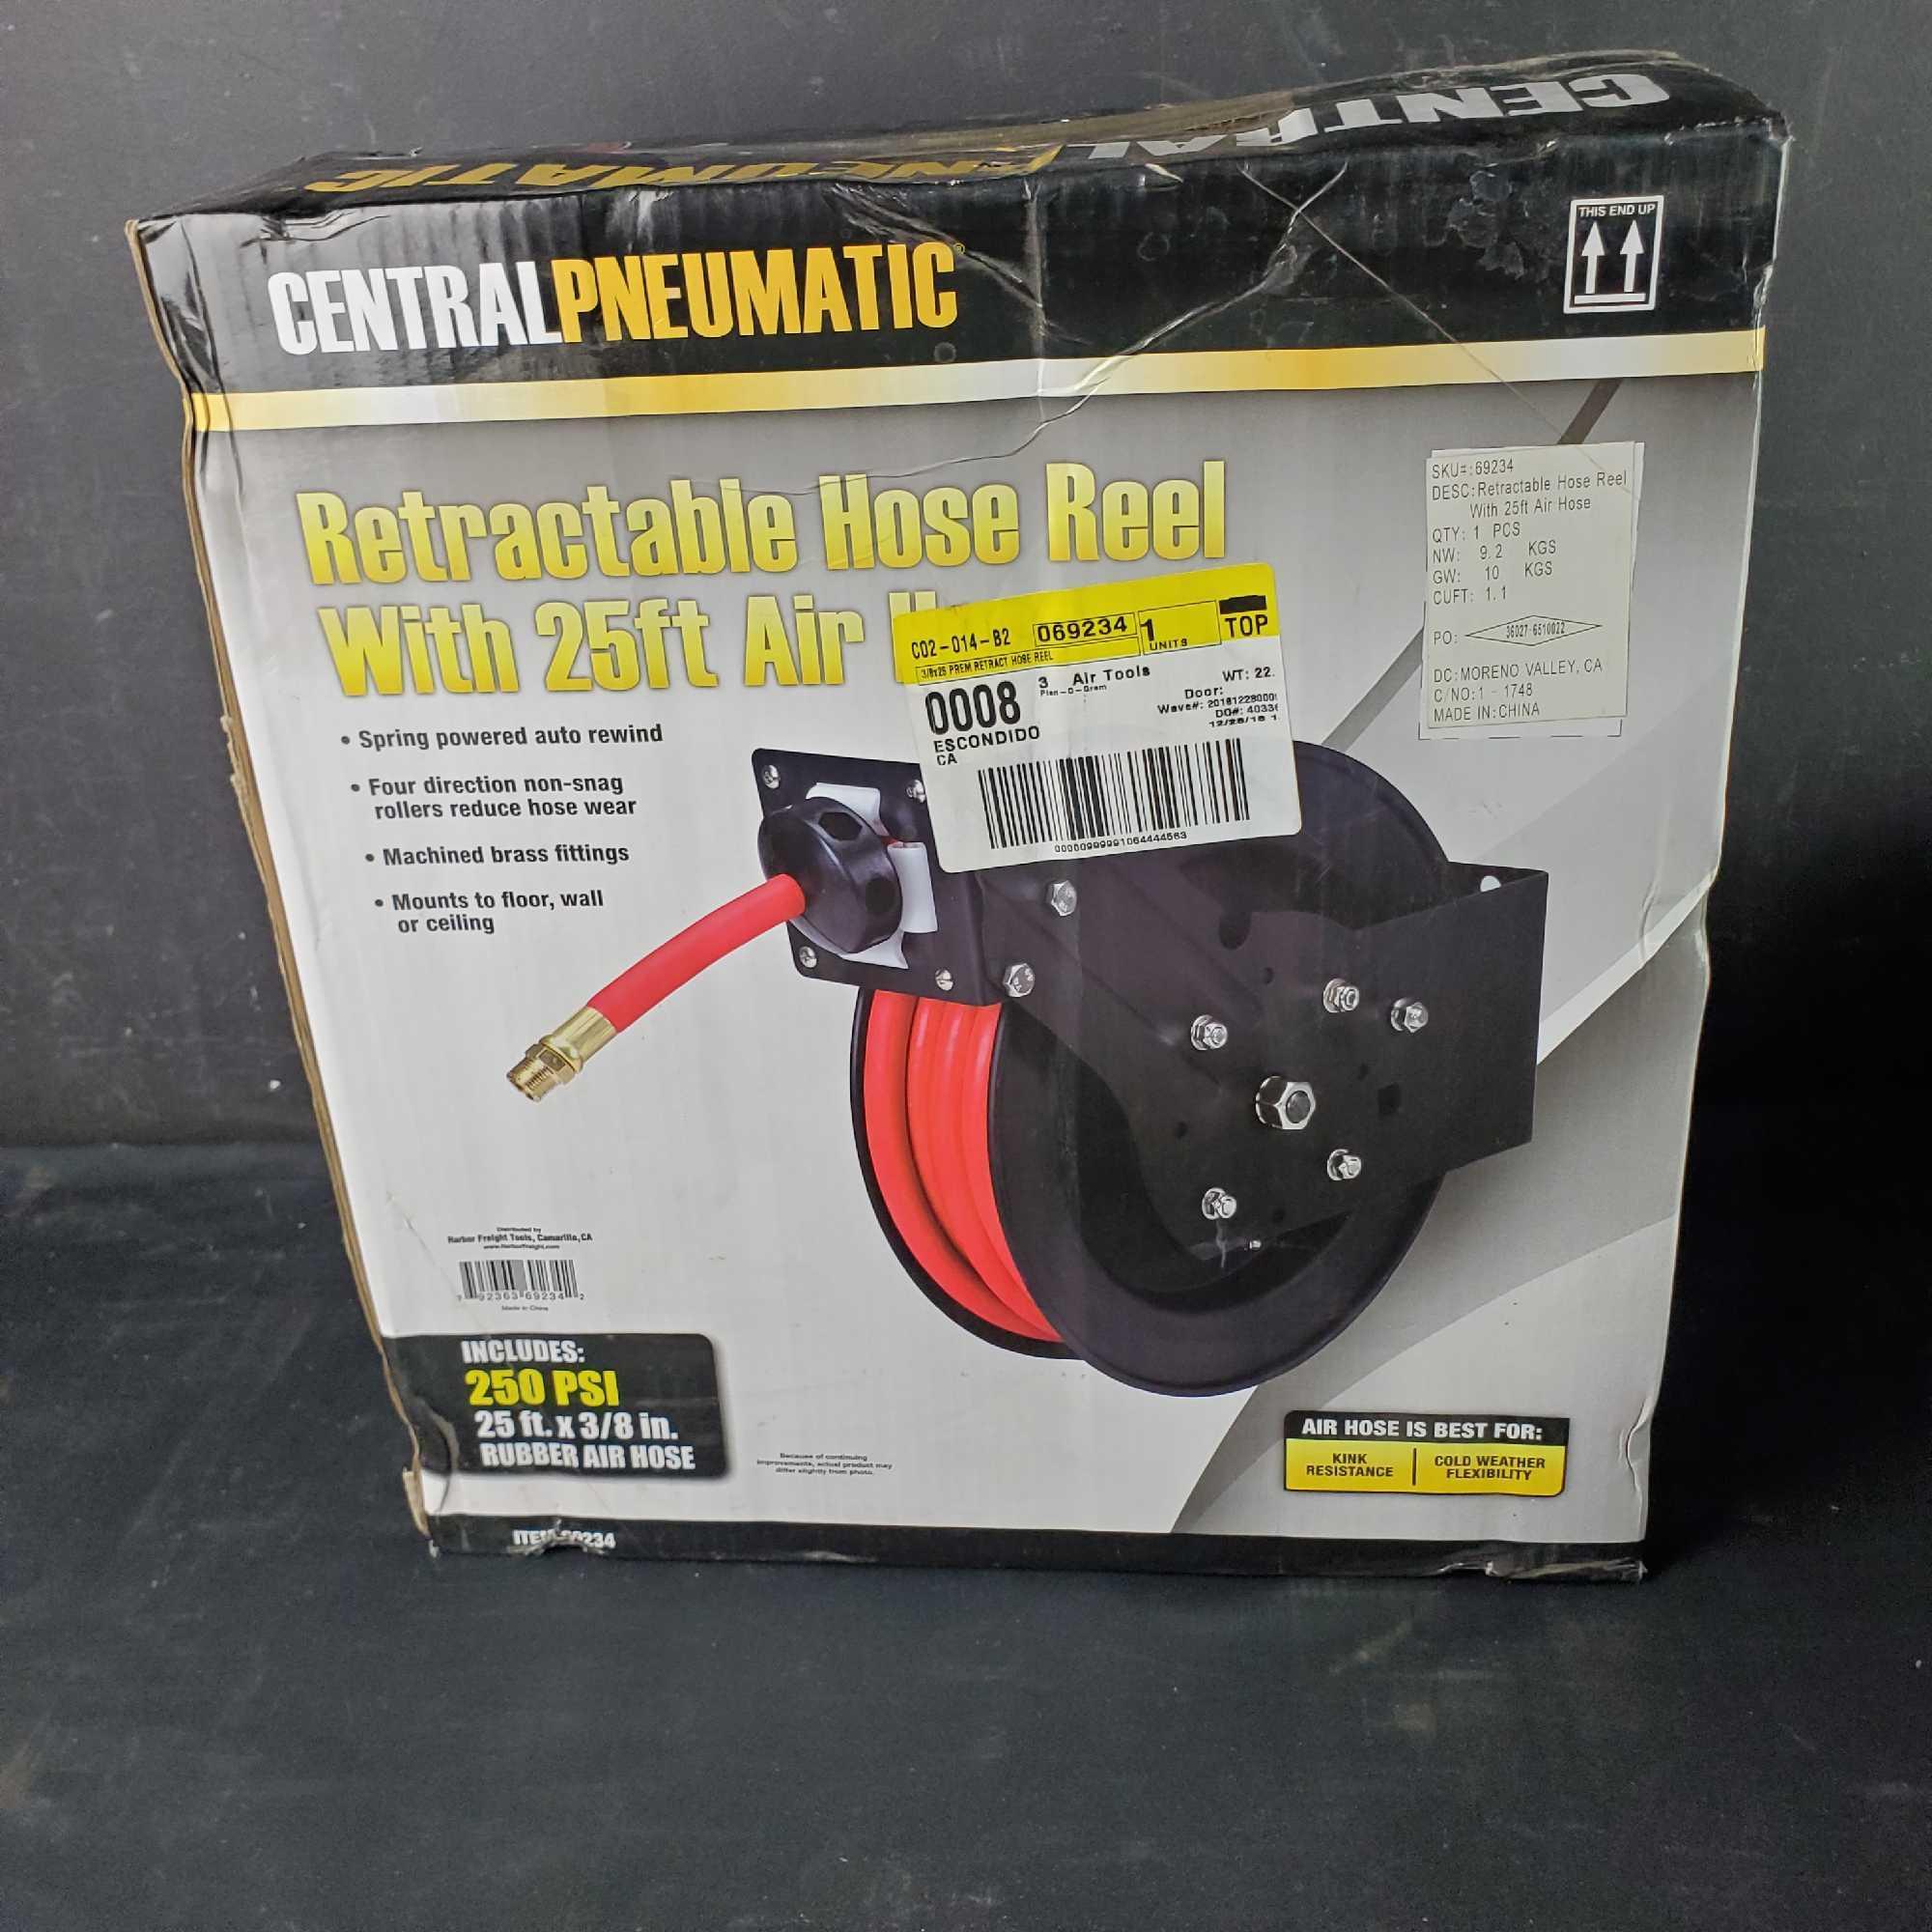 Central Pneumatic retractable hose reel with 25ft